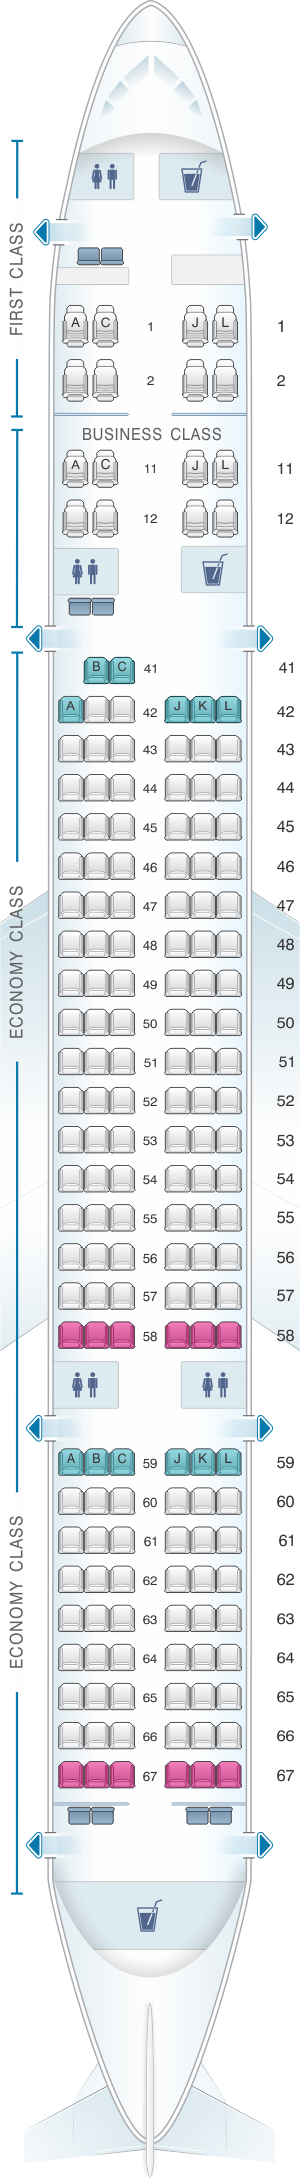 Seat map for Xiamen Airlines Boeing B757 200 174pax